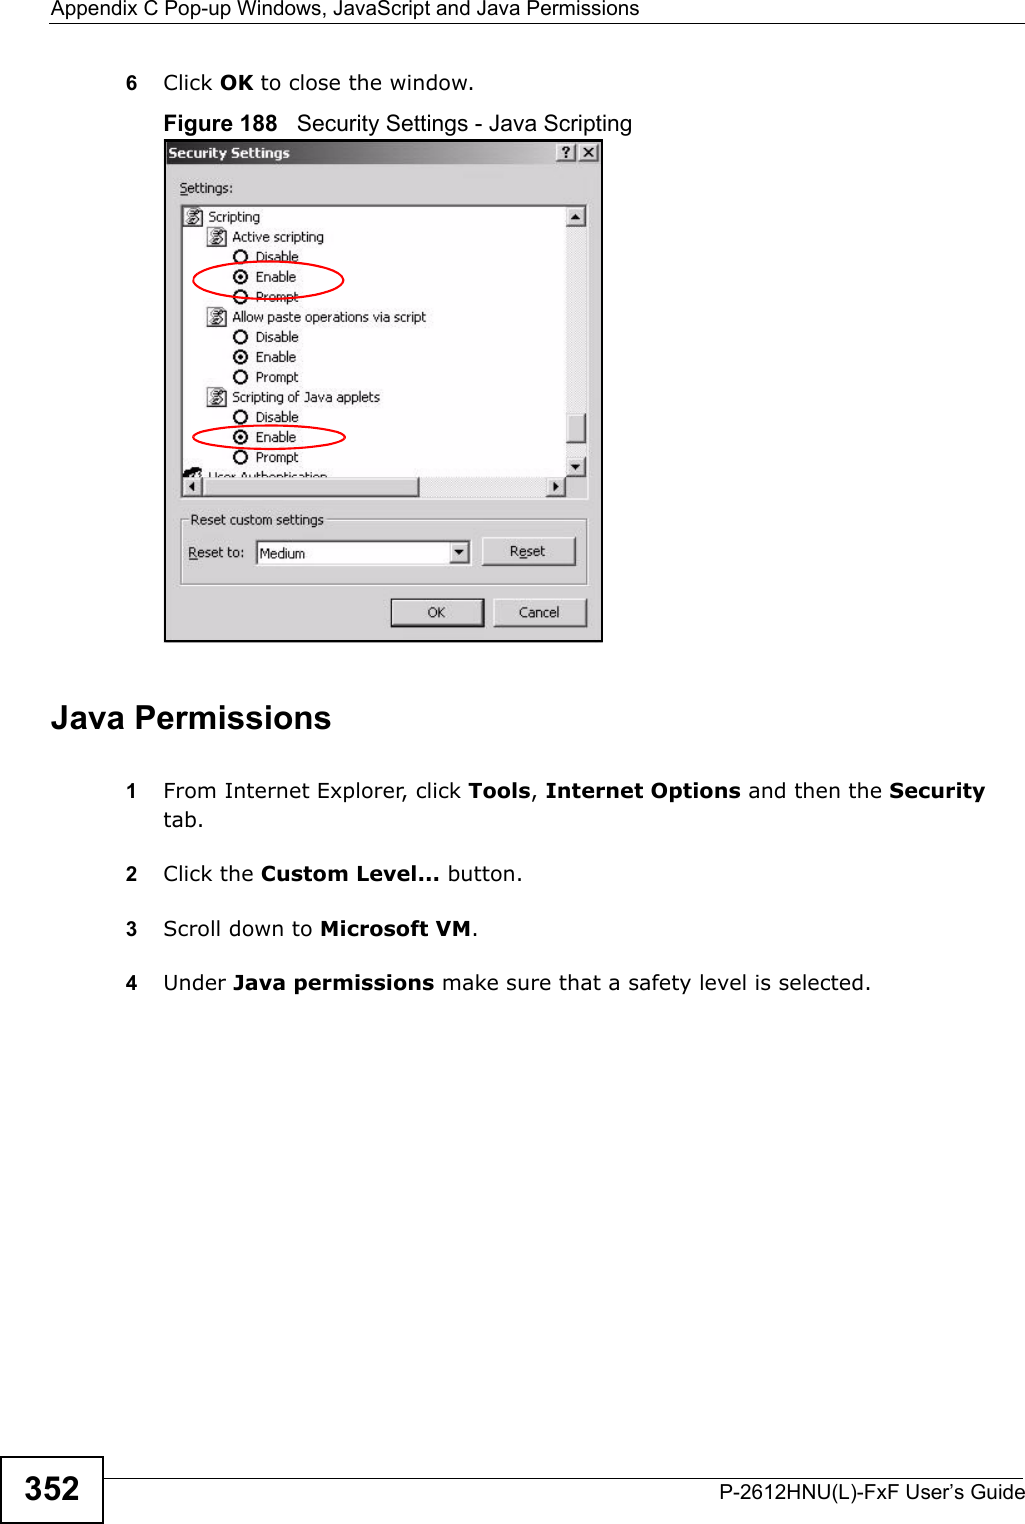 Appendix C Pop-up Windows, JavaScript and Java PermissionsP-2612HNU(L)-FxF User’s Guide3526Click OK to close the window.Figure 188   Security Settings - Java ScriptingJava Permissions1From Internet Explorer, click Tools, Internet Options and then the Securitytab.2Click the Custom Level... button. 3Scroll down to Microsoft VM. 4Under Java permissions make sure that a safety level is selected.